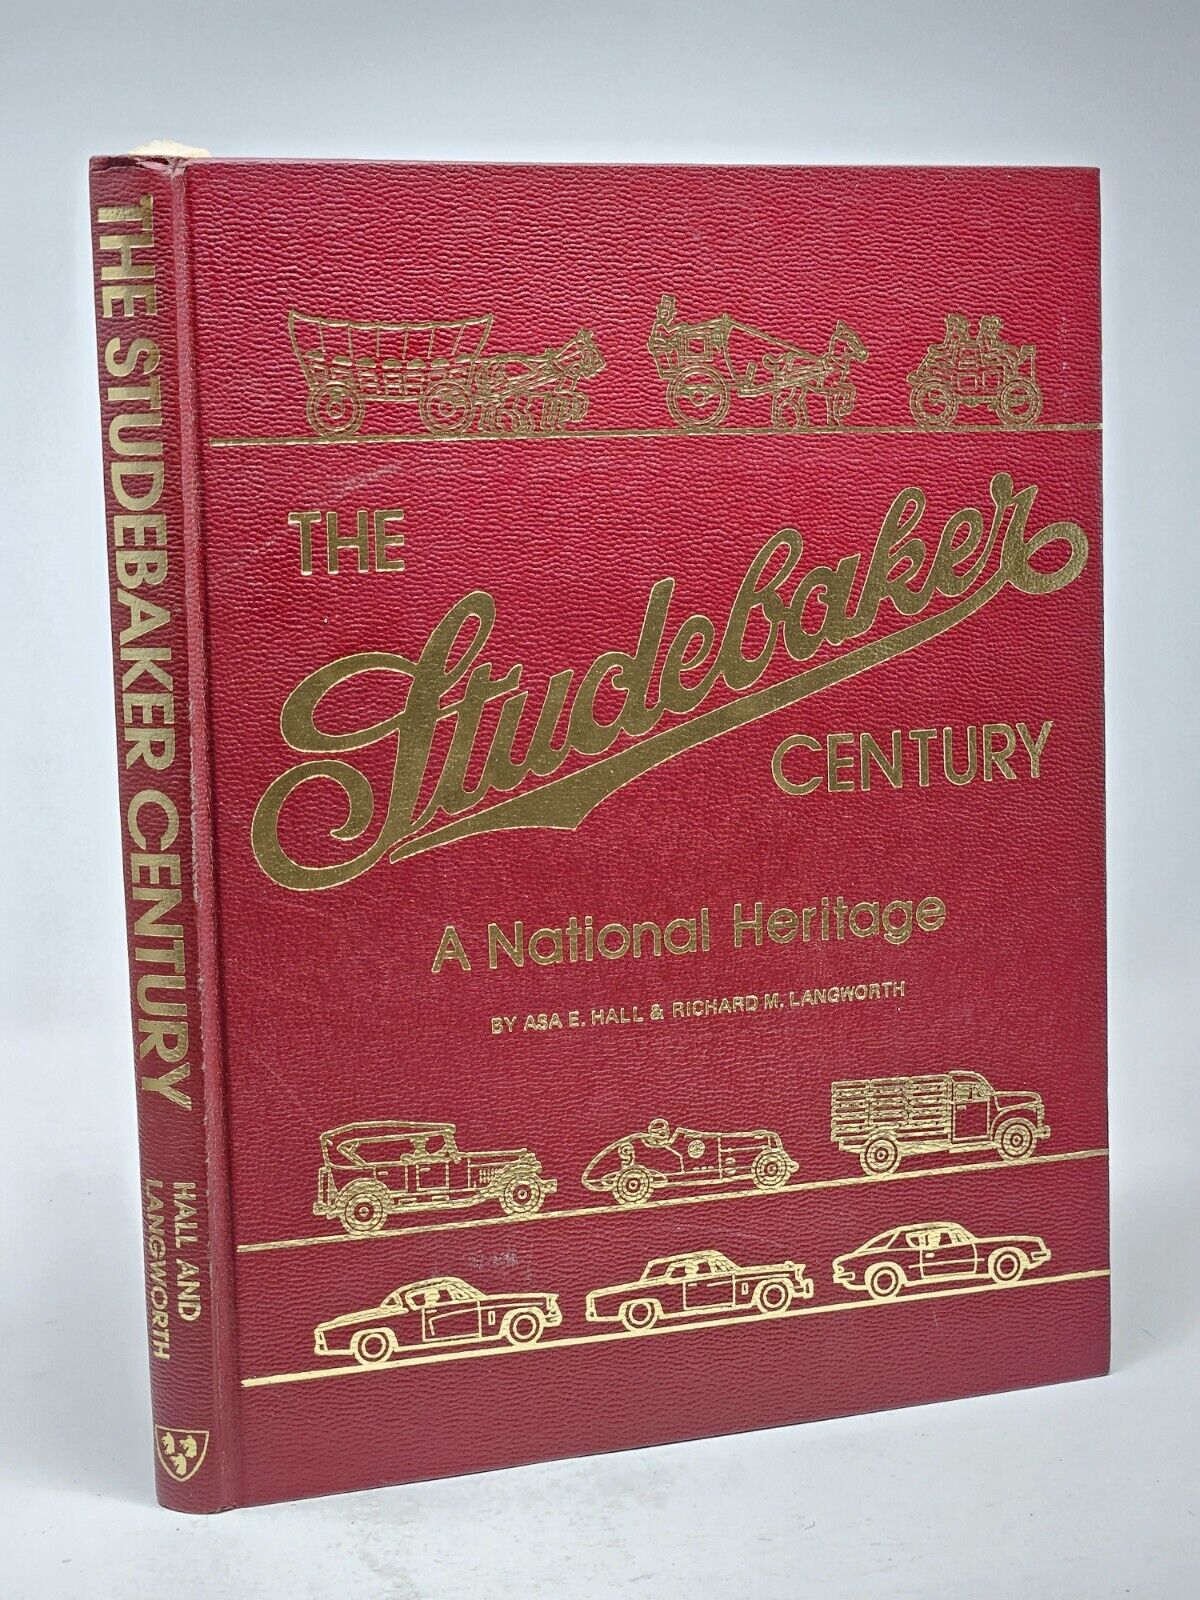 The Studebaker Century. A National Heritage. By Asa E. Hall & Richard Langworth